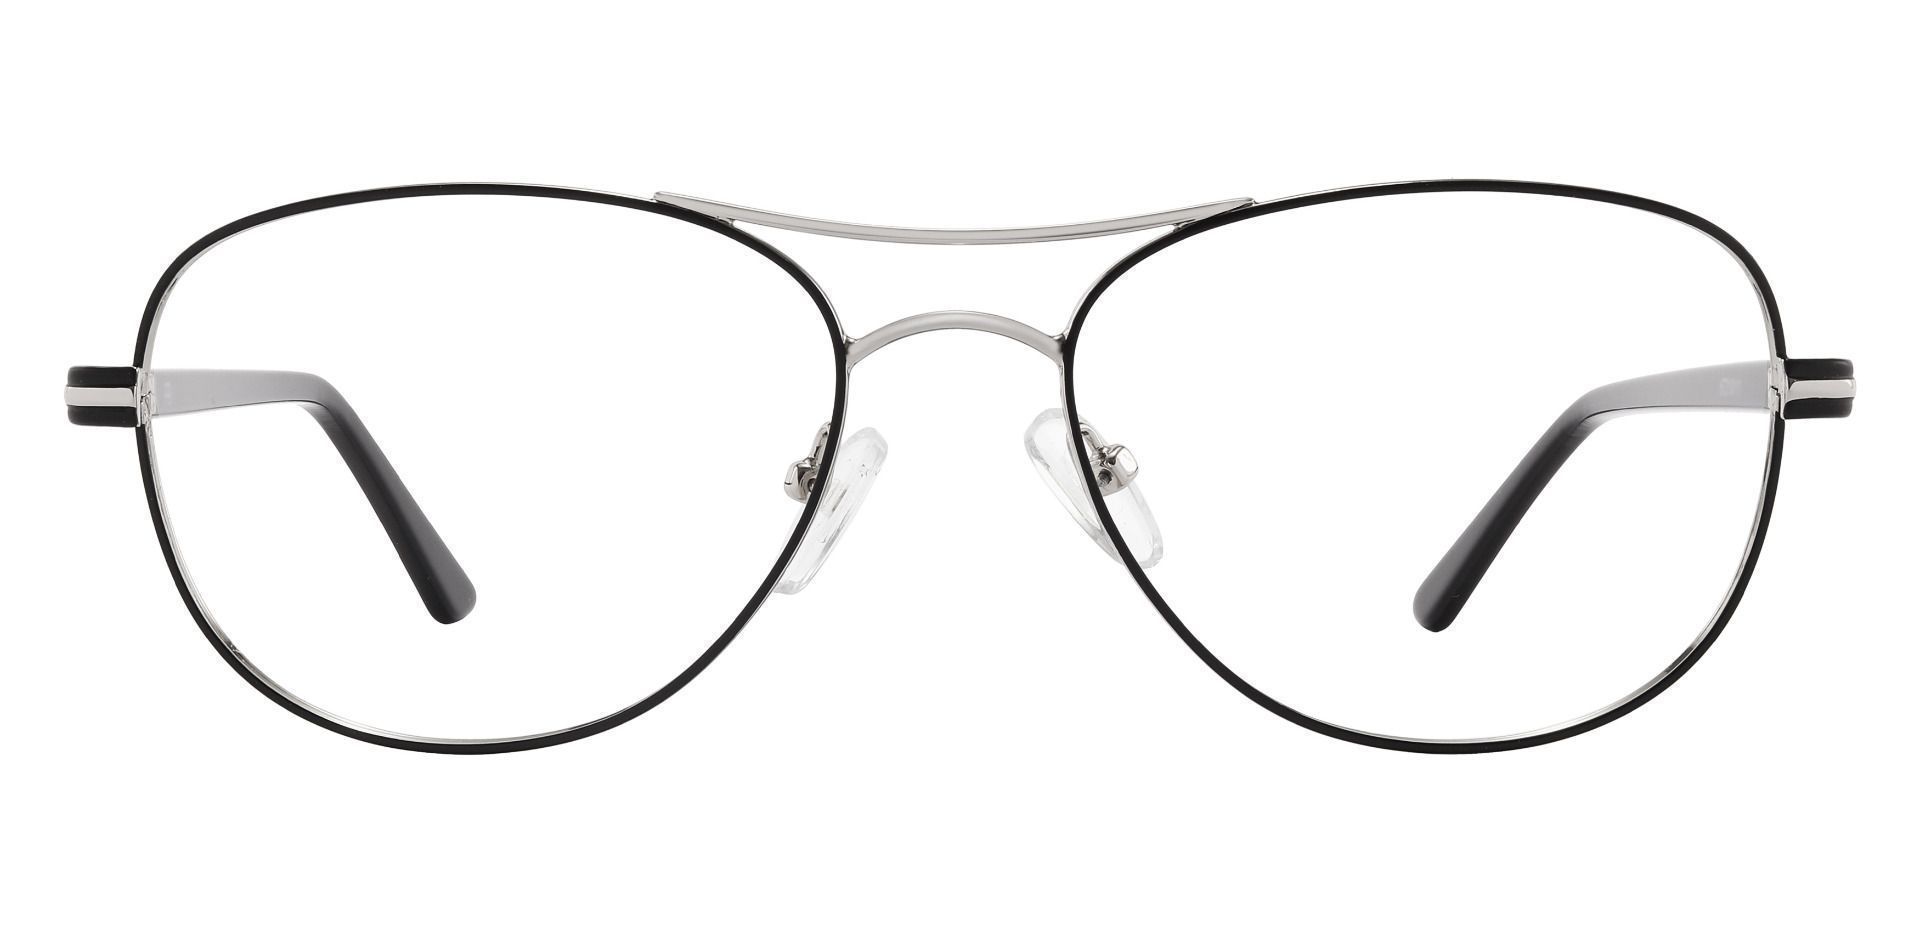 Reeves Aviator Non-Rx Glasses - Silver